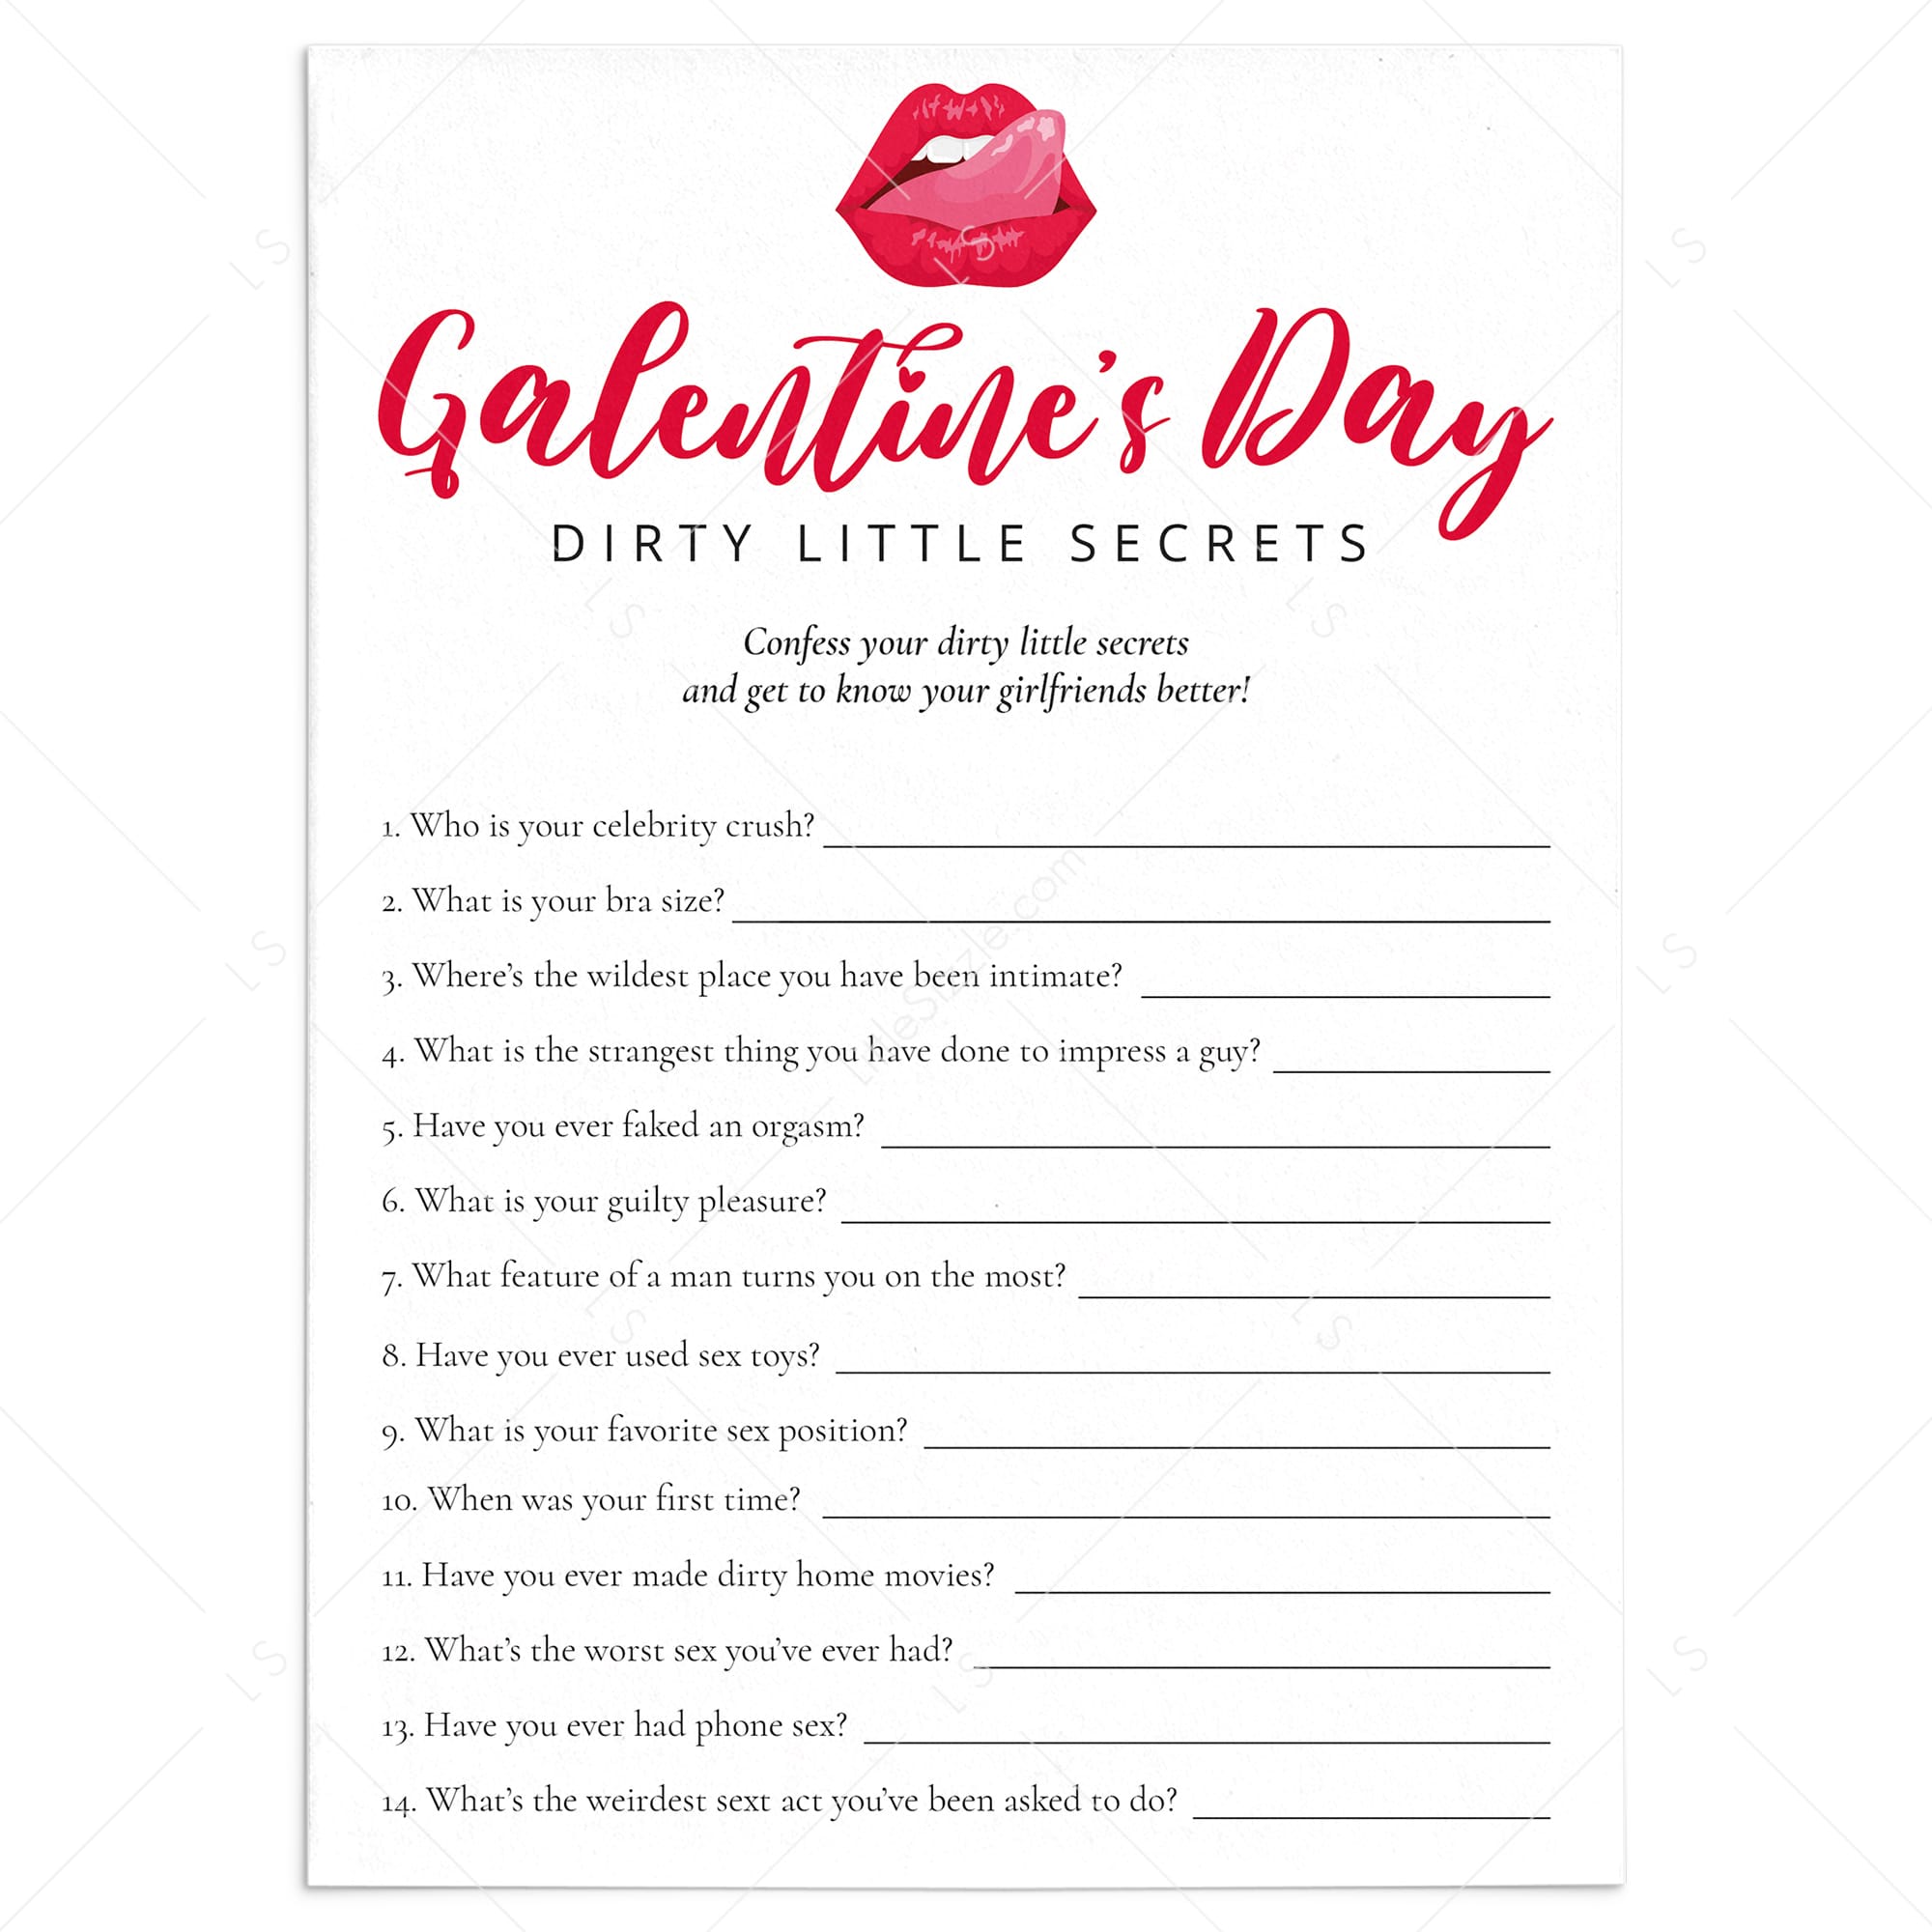 Hilarious Galentine's Day Game for Adults Dirty Little Secrets Printable by LittleSizzle